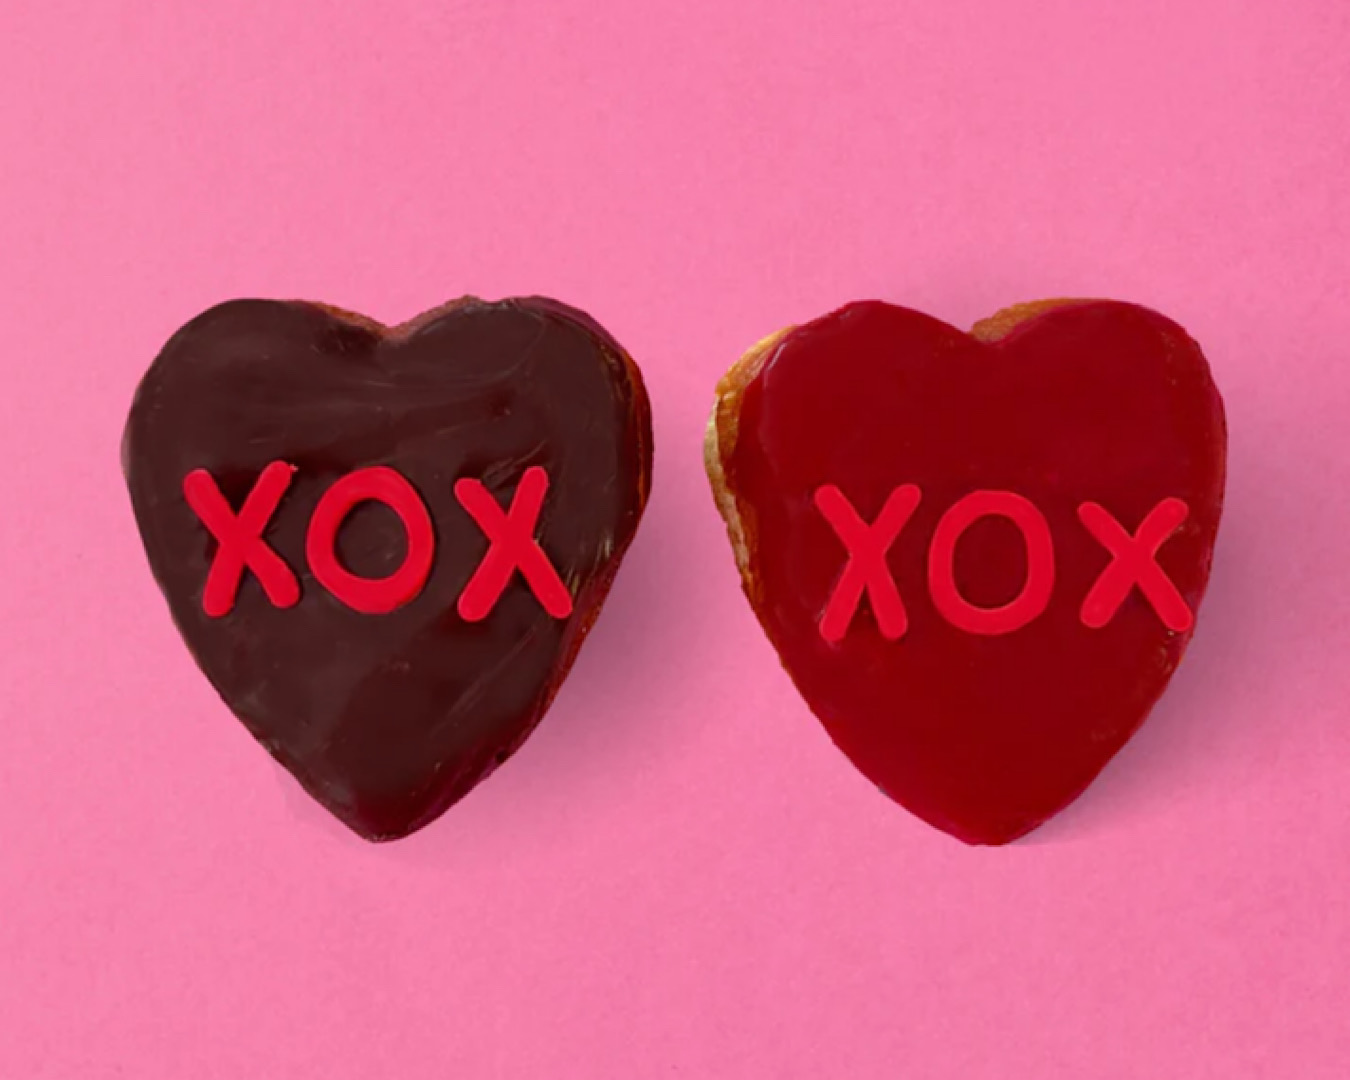 Two heart-shaped donuts-one red, one brown-with XOX written on them in icing. 